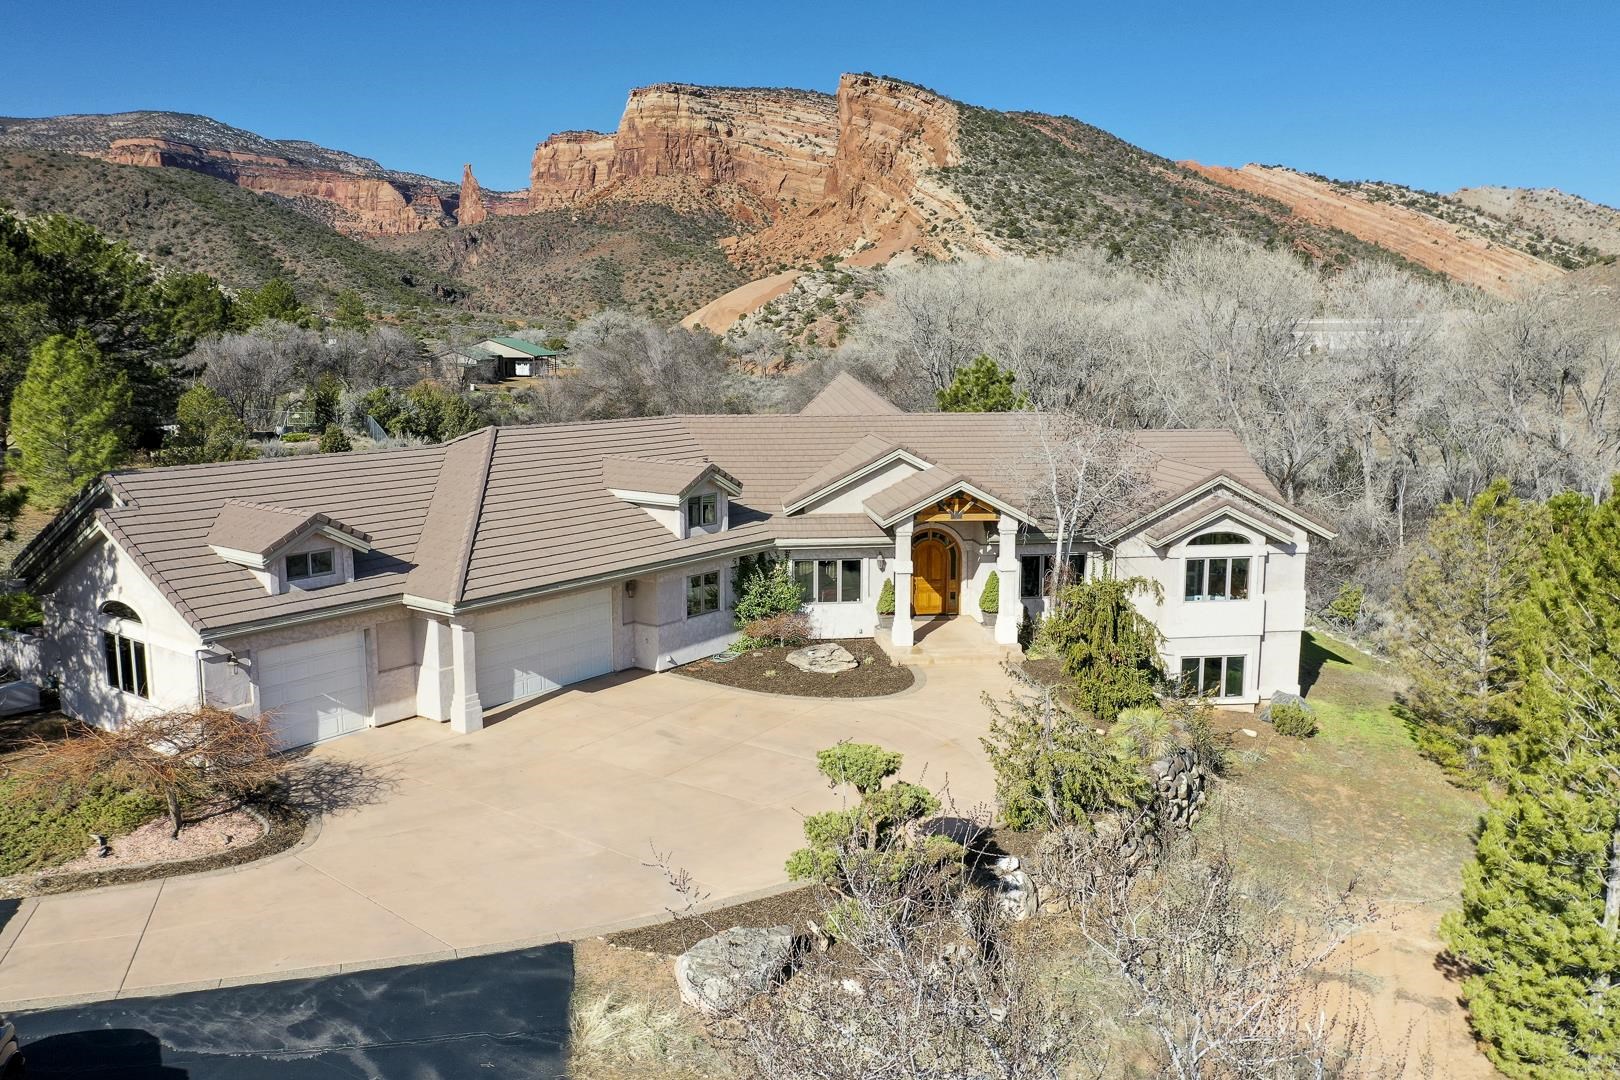 Situated at the base of the Colorado National Monument w/epic views of Independence Rock! This home was designed to feature Independence Rock & the National Monument like no other home you'll see & you'll know the second you walk through the front door! Designed w/dramatic 3 story wall of windows that is 30 feet wide which creates an incredible effect, similar to living wall paper. No 2 days will ever appear the same from this incredible home! The master & office are on main floor & down stairs you'll find 2 more bedrooms w/family room & wet bar. Master suite is incredible & features not only a luxury bath w/walk in closet, but private balcony where you can enjoy the views & watching wildlife that moseys by. Located down private drive w /over 5000 square feet, 3 bedrooms + office, 4 baths, 3 car garage w/plenty of RV parking & nice enclosed back yard!!